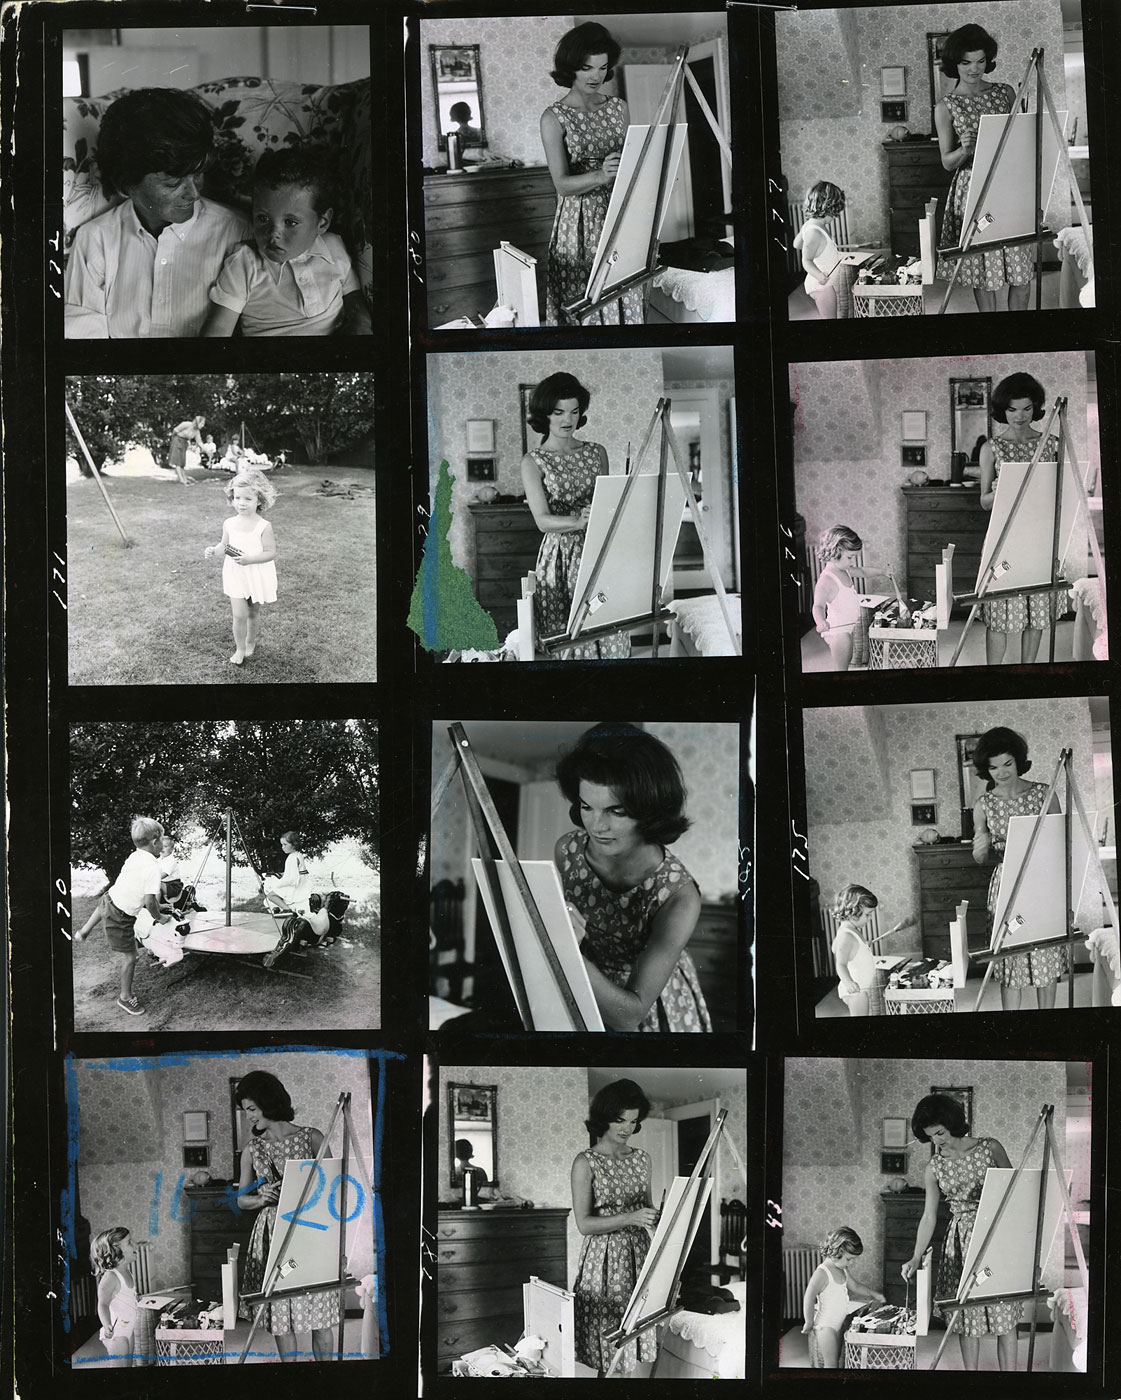 The image marked in blue in the bottom left corner of this contact sheet was used by Newseum staff to restore the photo of Jacqueline Kennedy painting for the “Creating Camelot” exhibit.